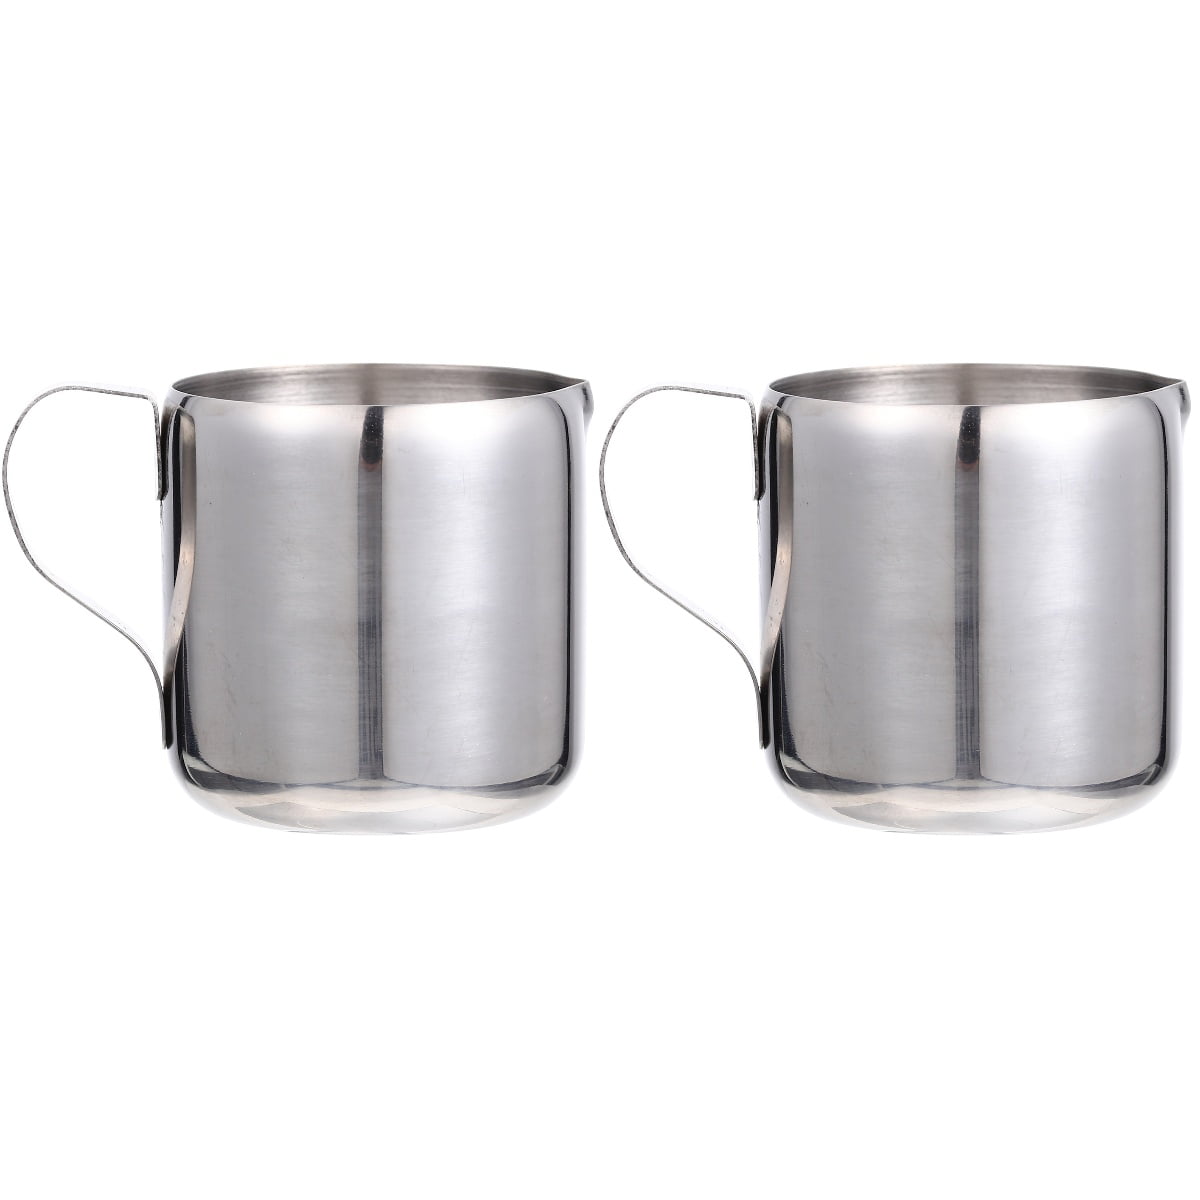 HOMEMAXS 2pcs Professional Milk Frothing Pitcher Stainless Steel Milk ...